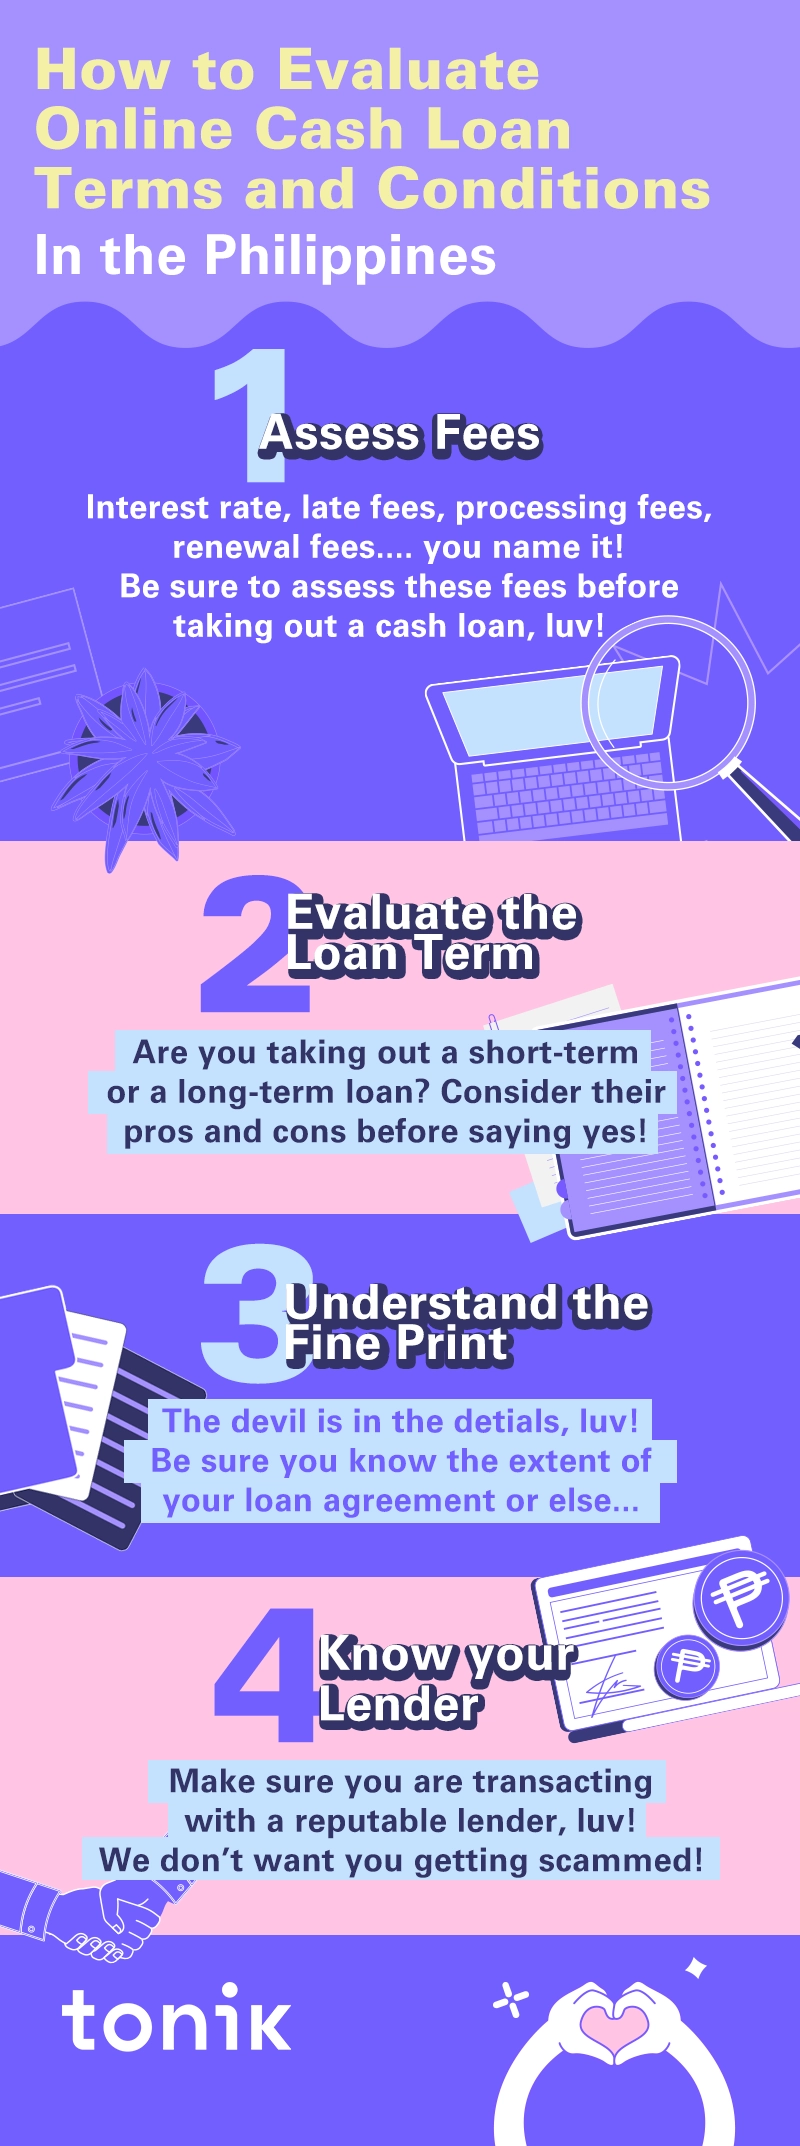 infographic that shows 4 tips on how Filipinos can evaluate their online cash loan terms and conditions